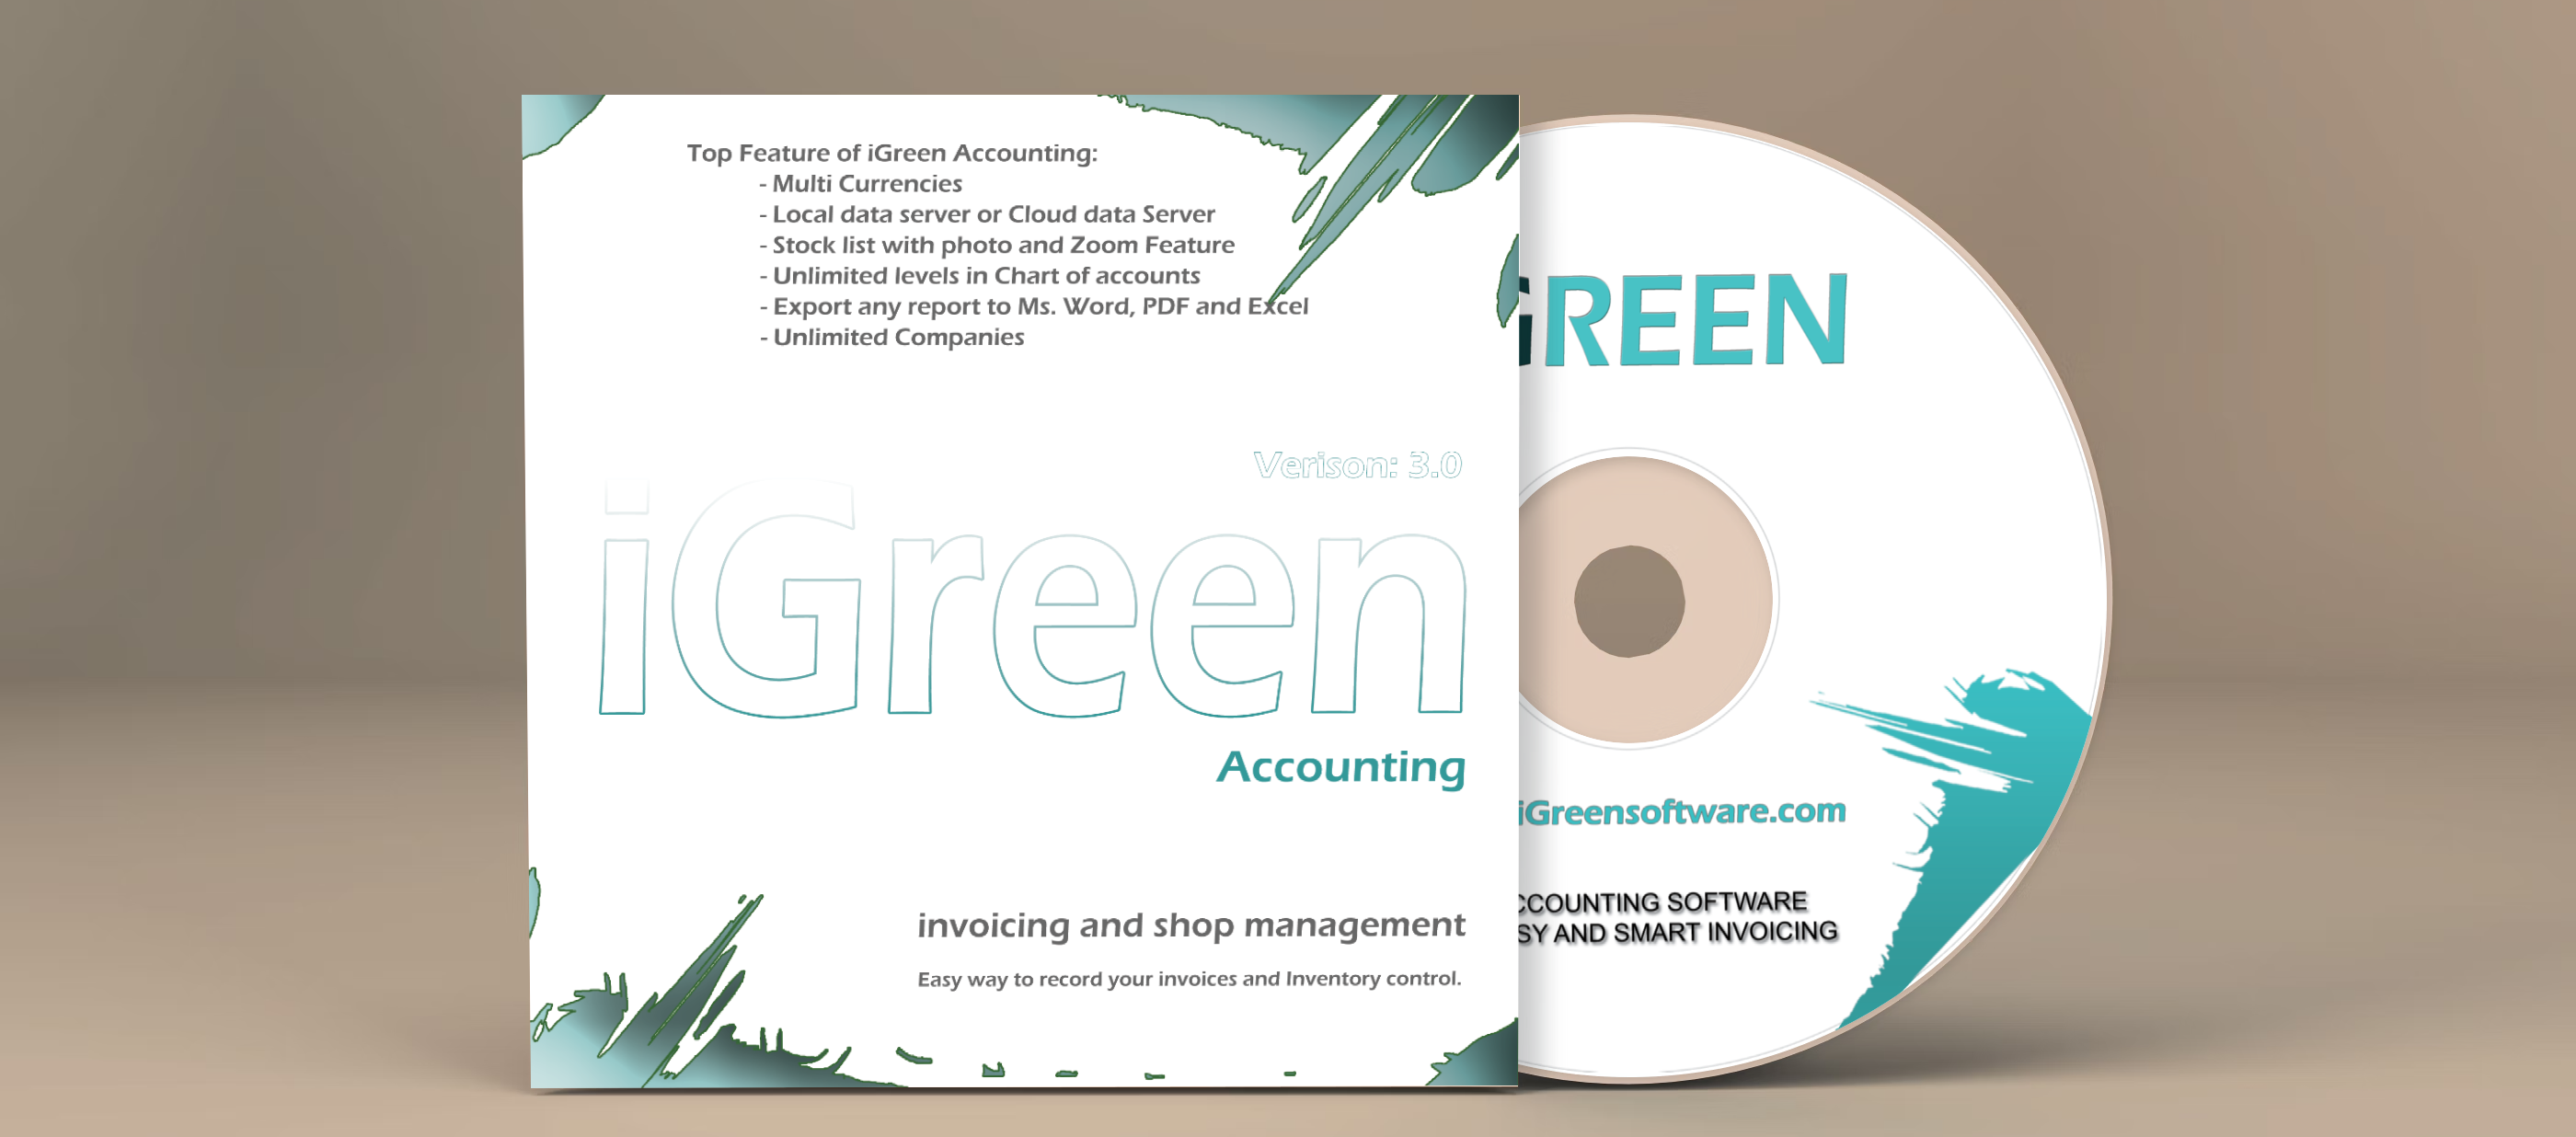 Free Accounting Software for Home Use